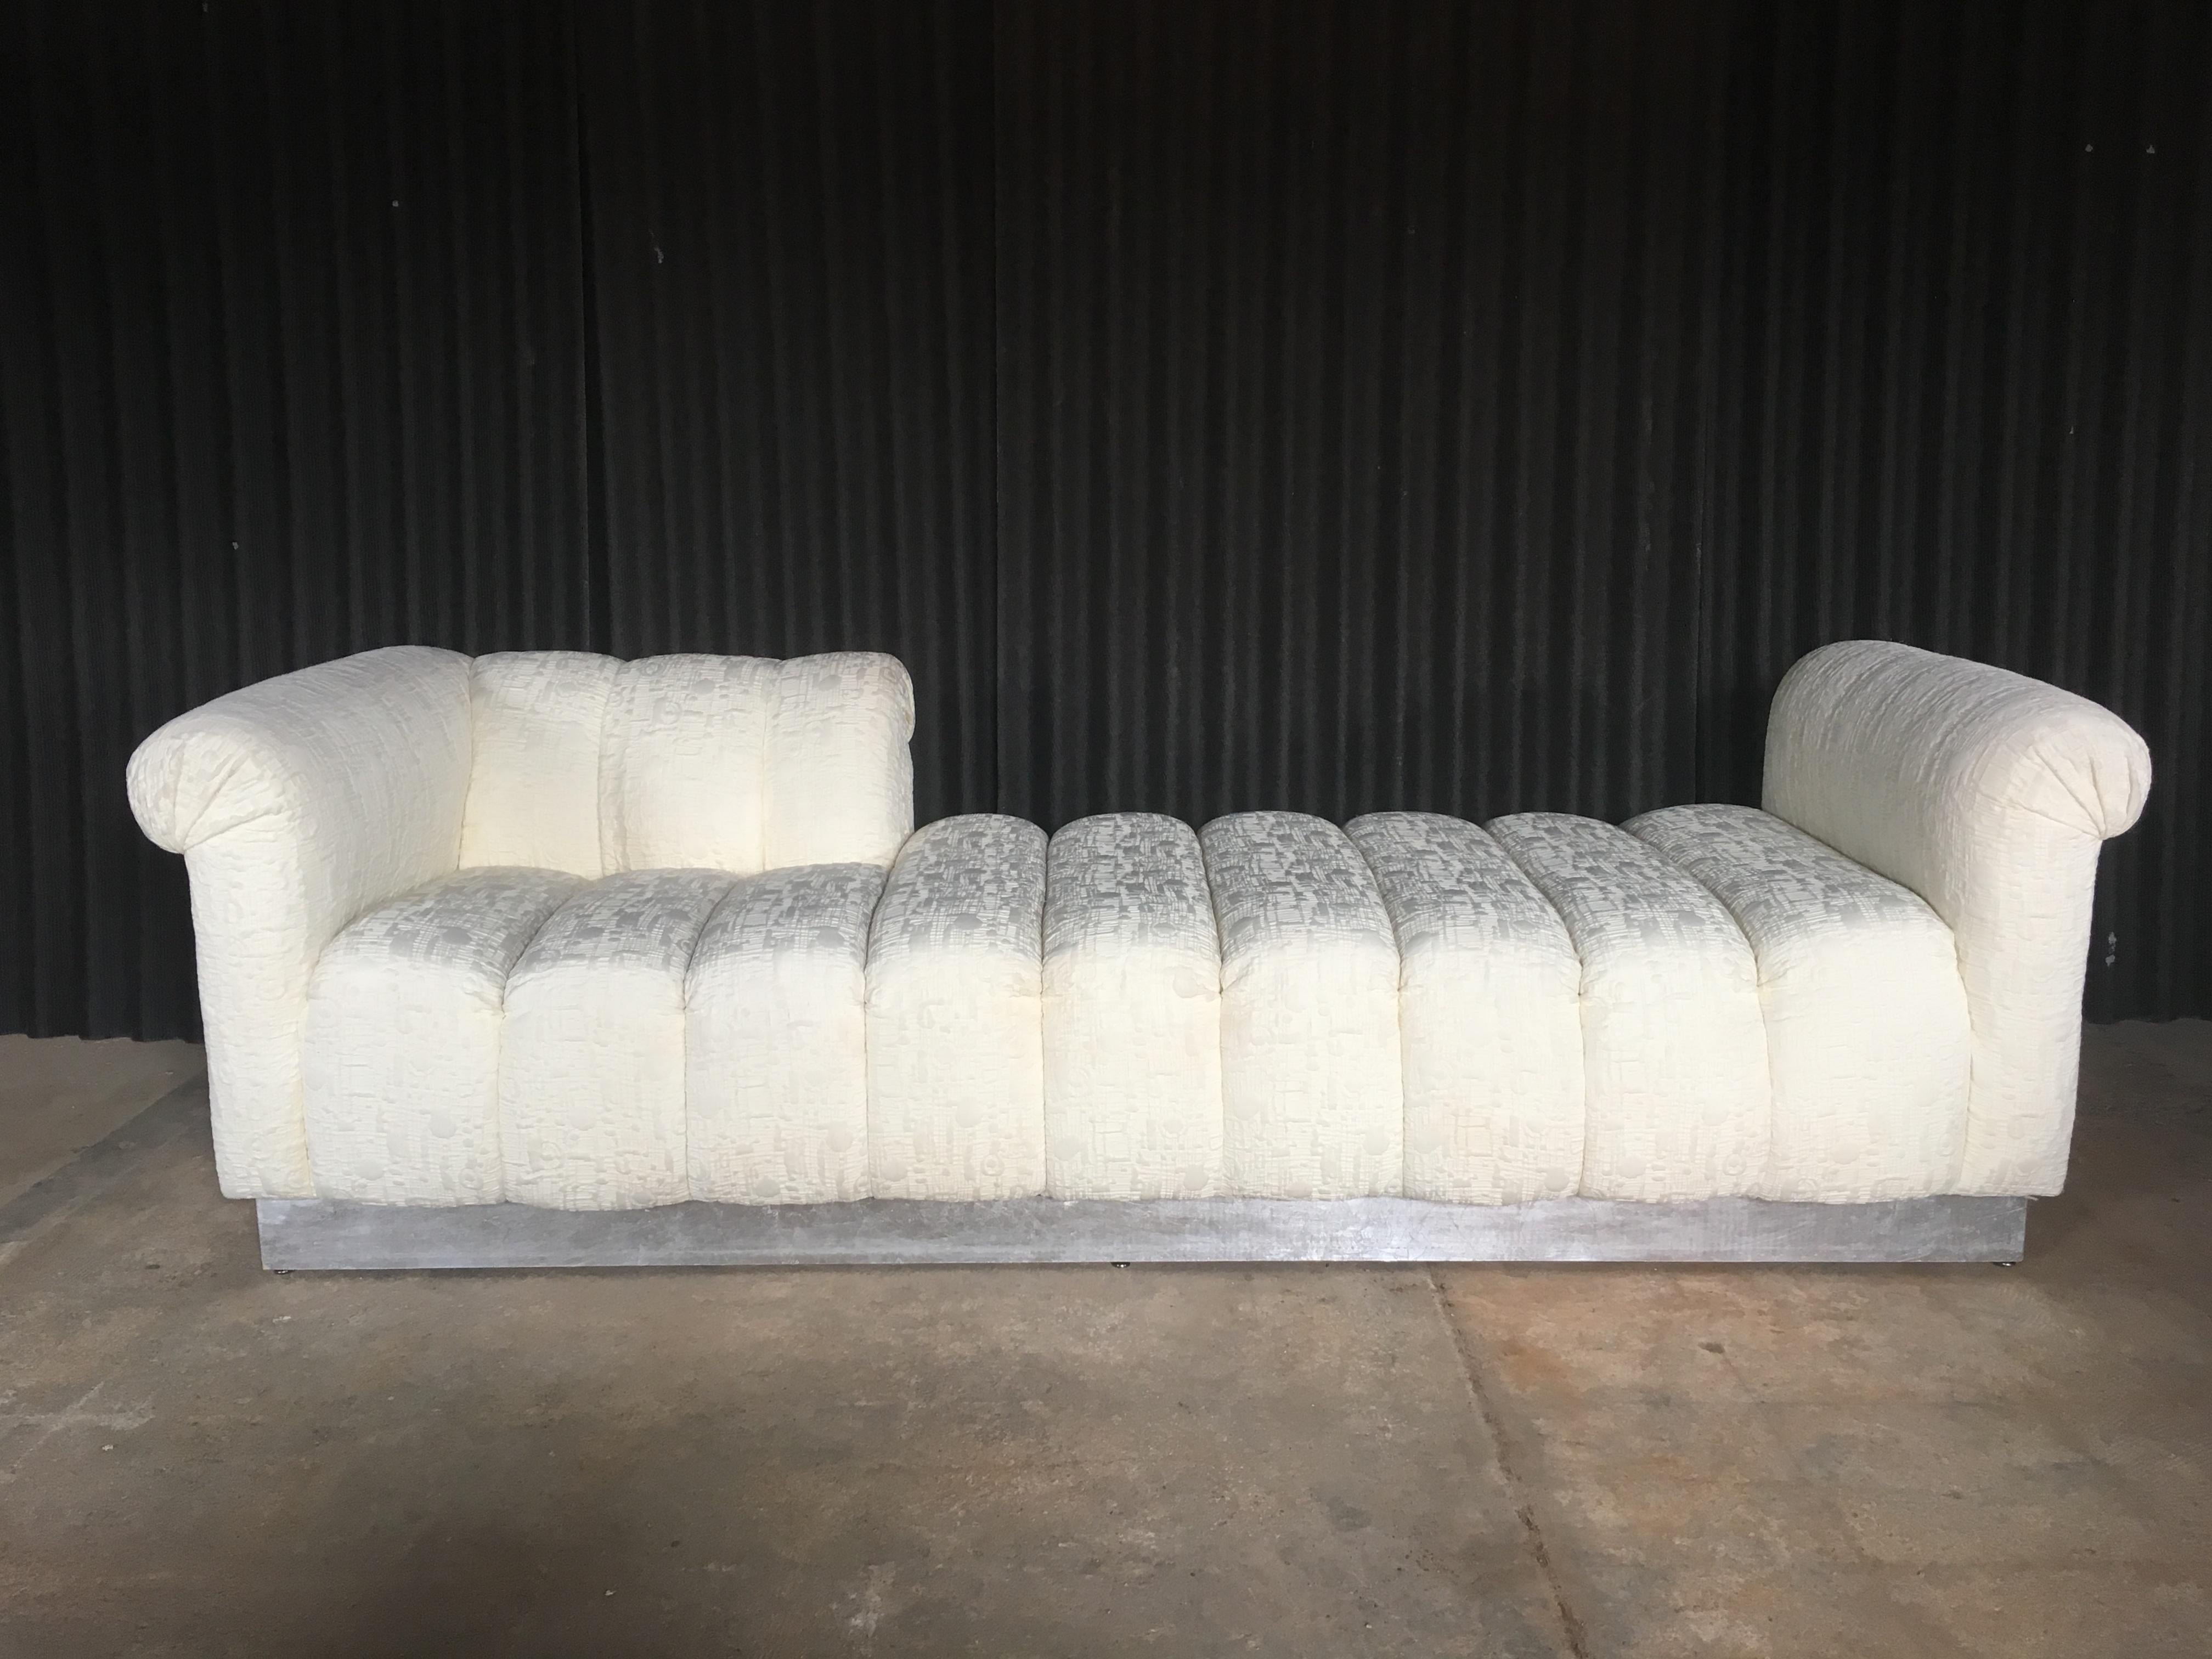 Fabulous Over-Sized Channel Tufted Chaise or Lounge Fainting Couch 6